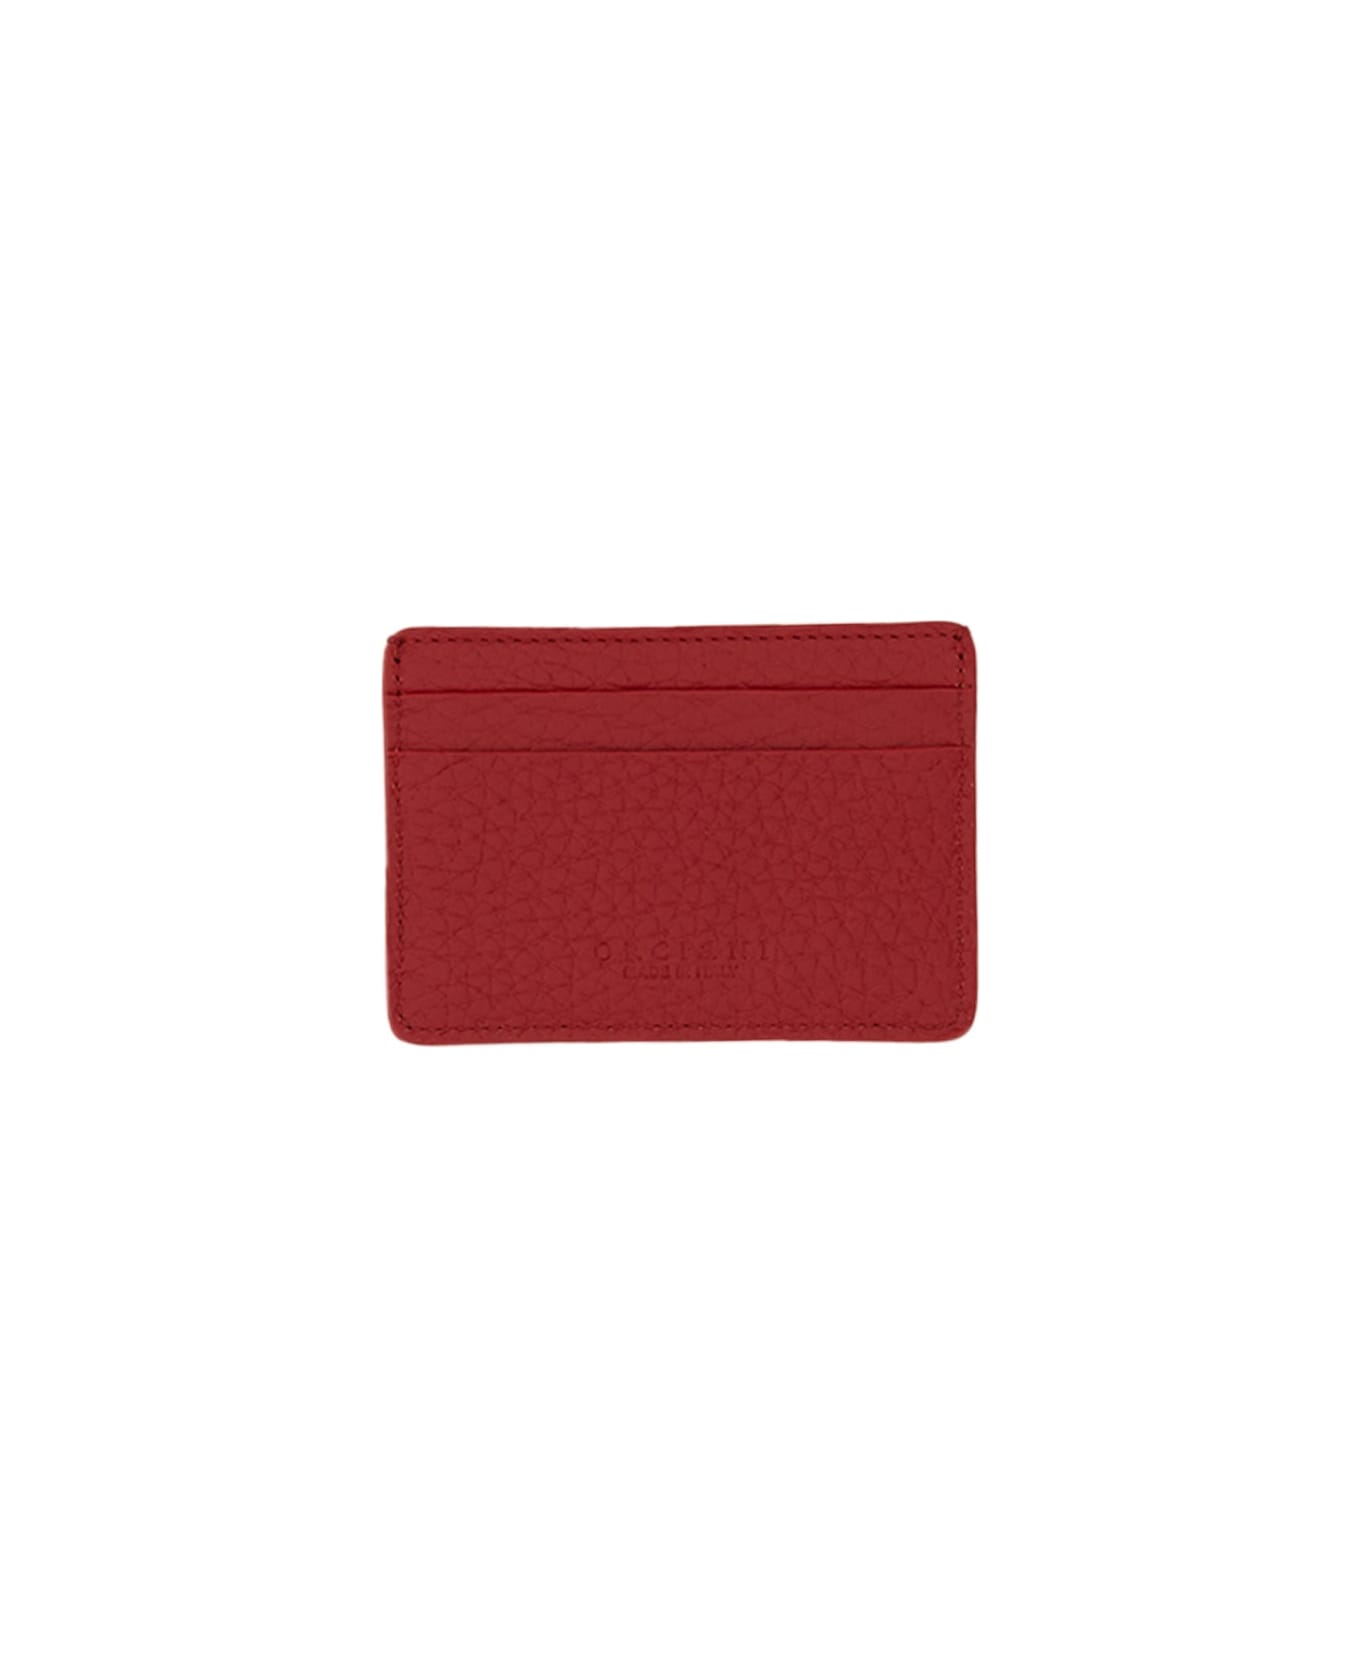 Orciani Soft Card Holder - RED 財布